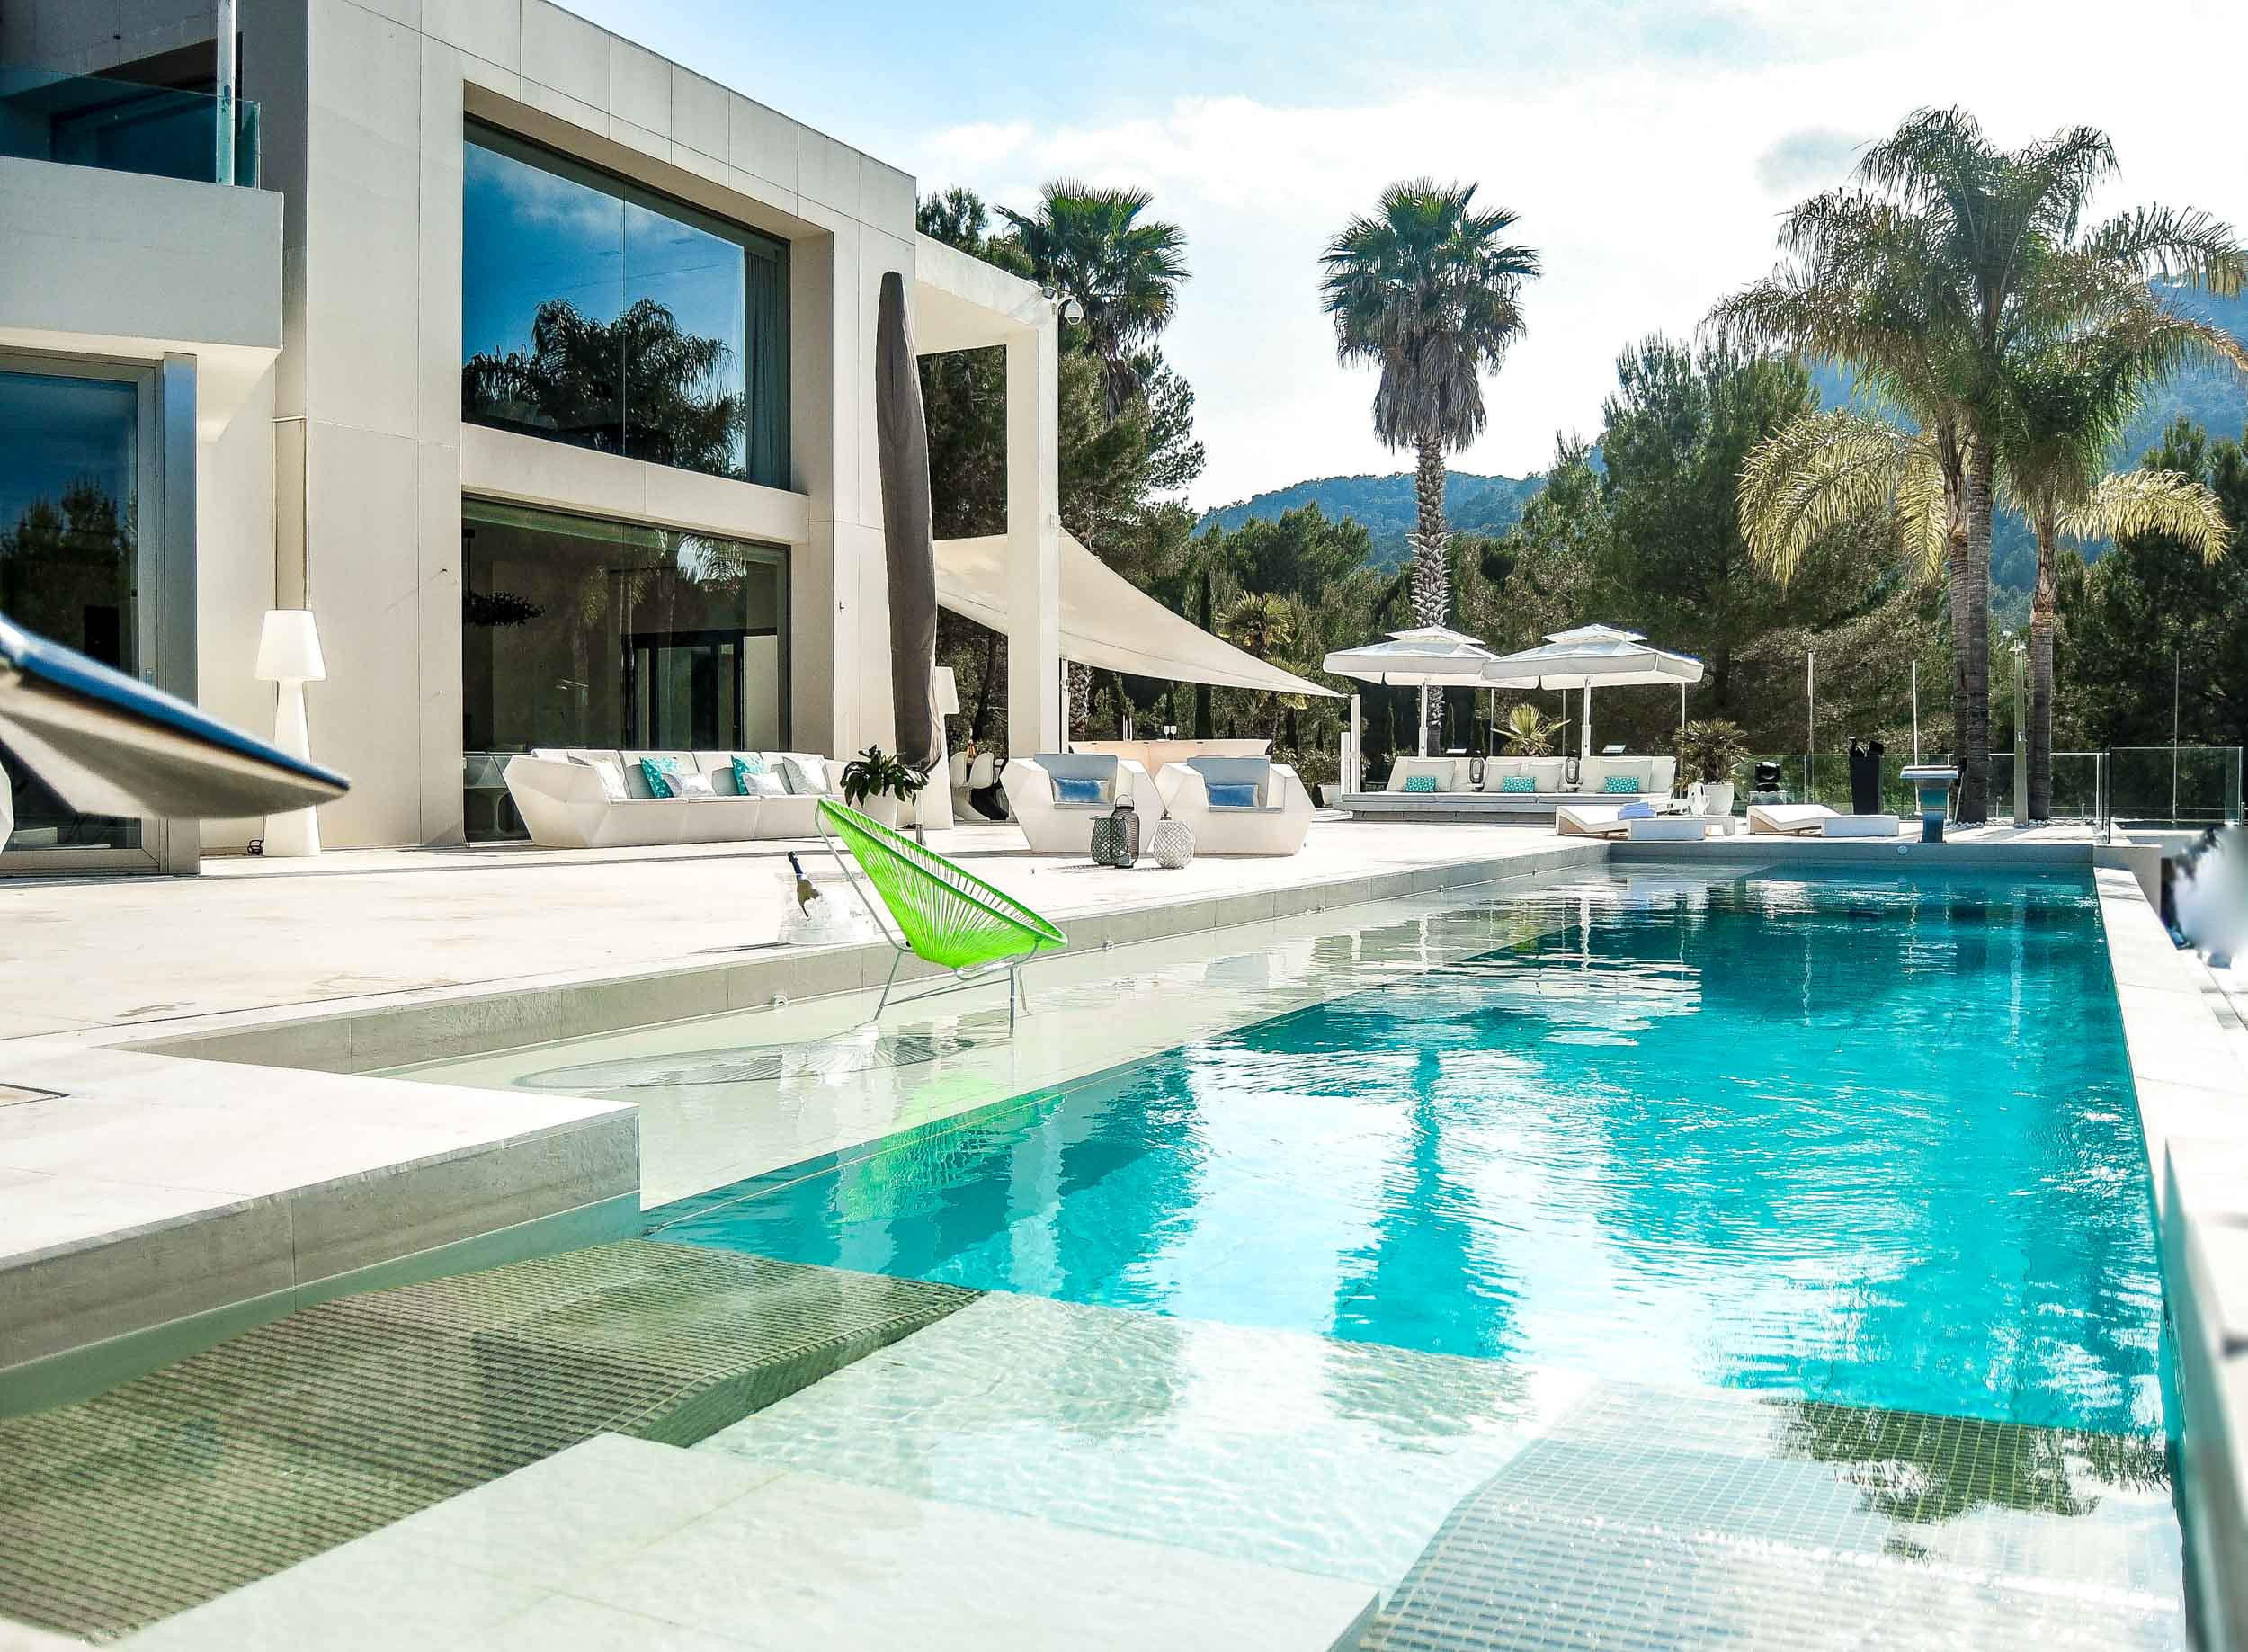 Spectacular exterior of Villa Sa Claror with its modern design and natural surroundings.